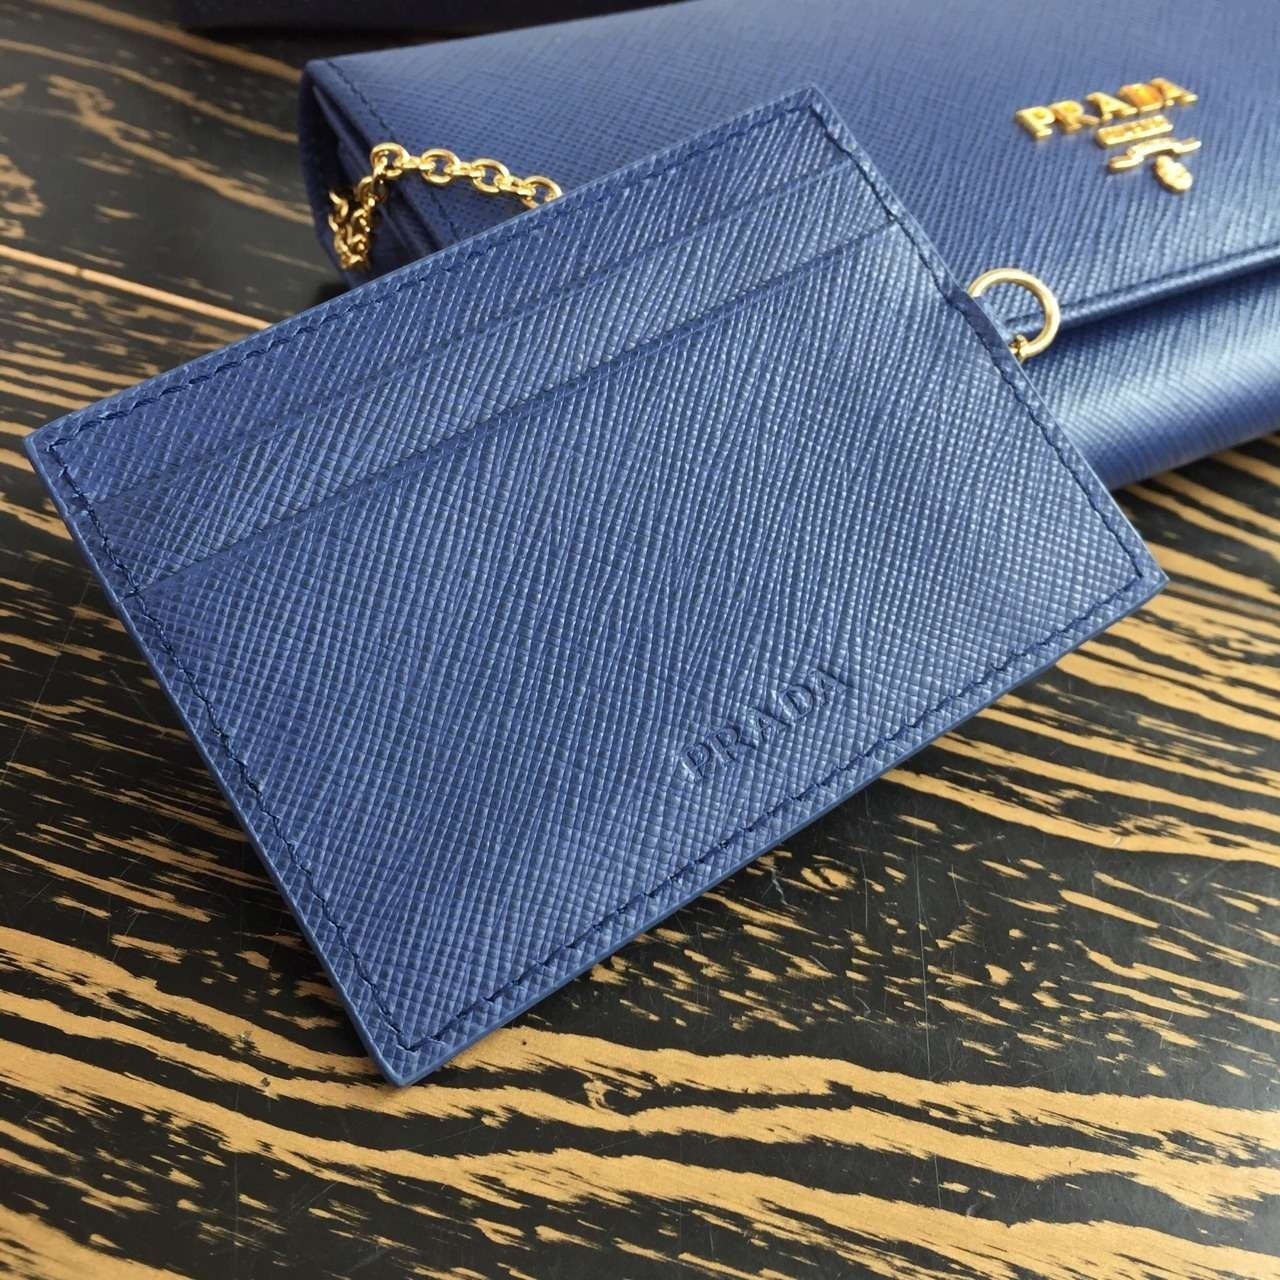 Prada Continental Wallet In Blue Saffiano Leather 542